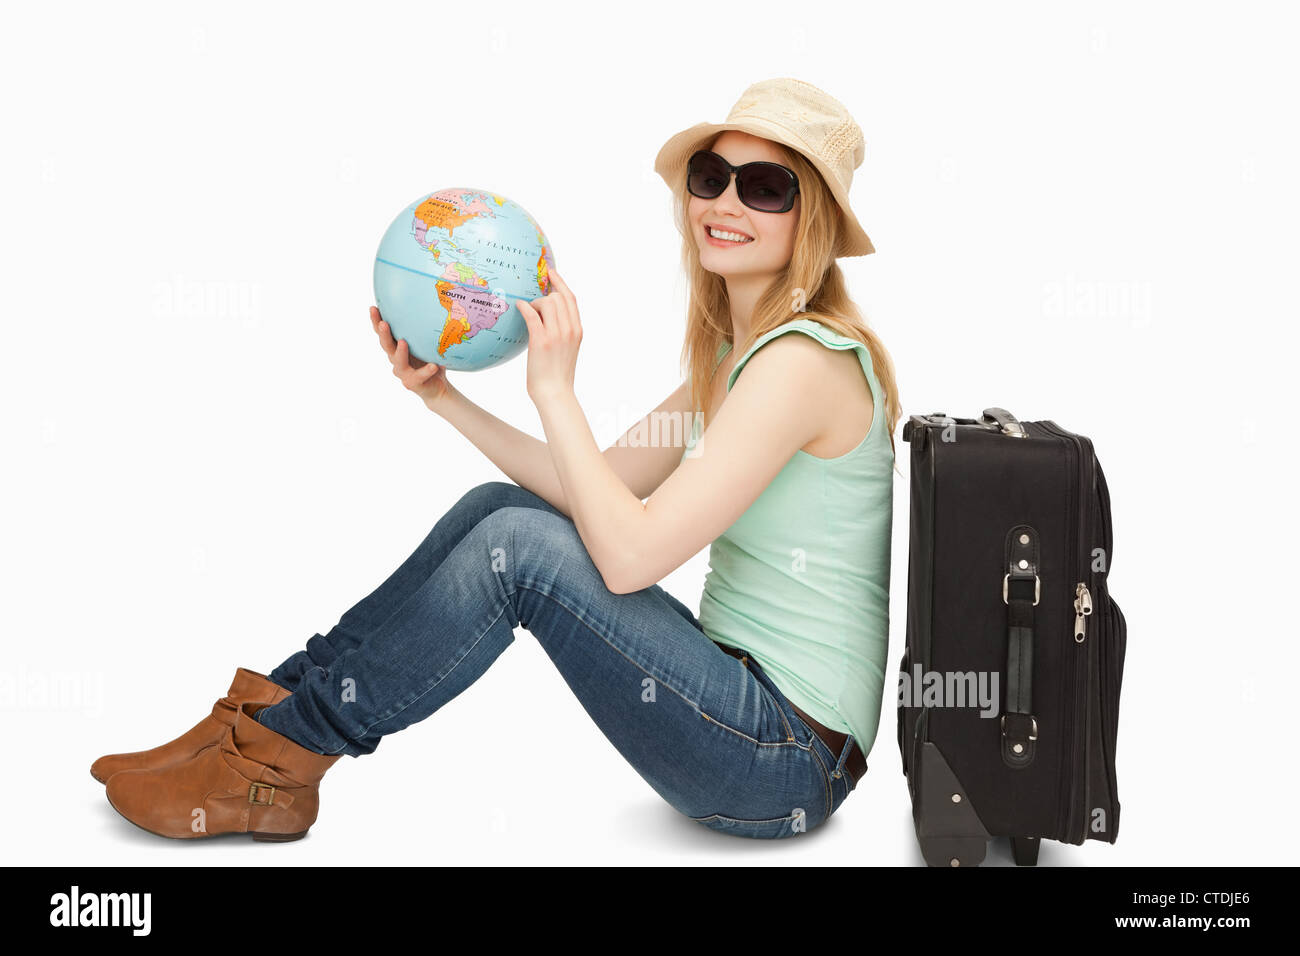 Woman holding a world globe while smiling Stock Photo